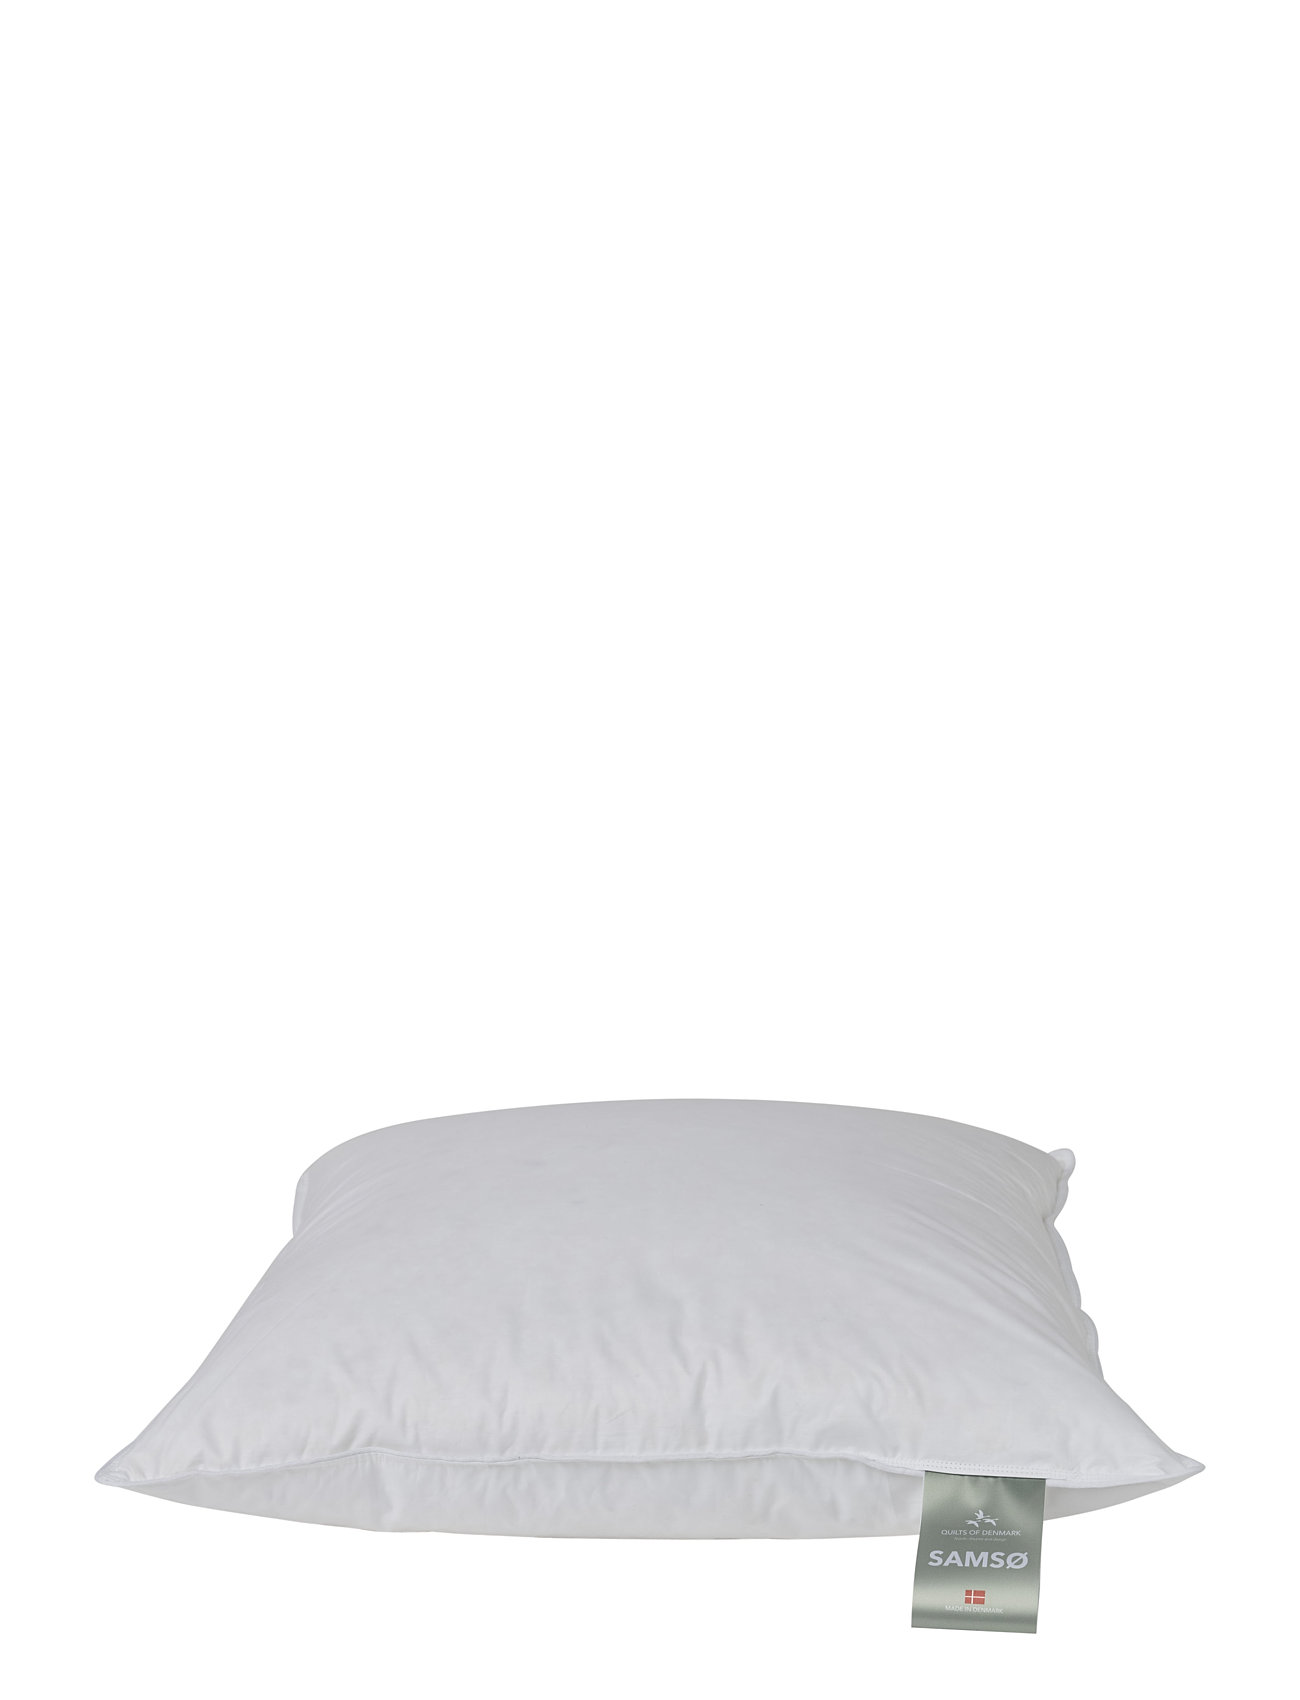 Quilts Of Denmark Samsø Pude Home Textiles Bedtextiles Pillows White Quilts Of Denmark